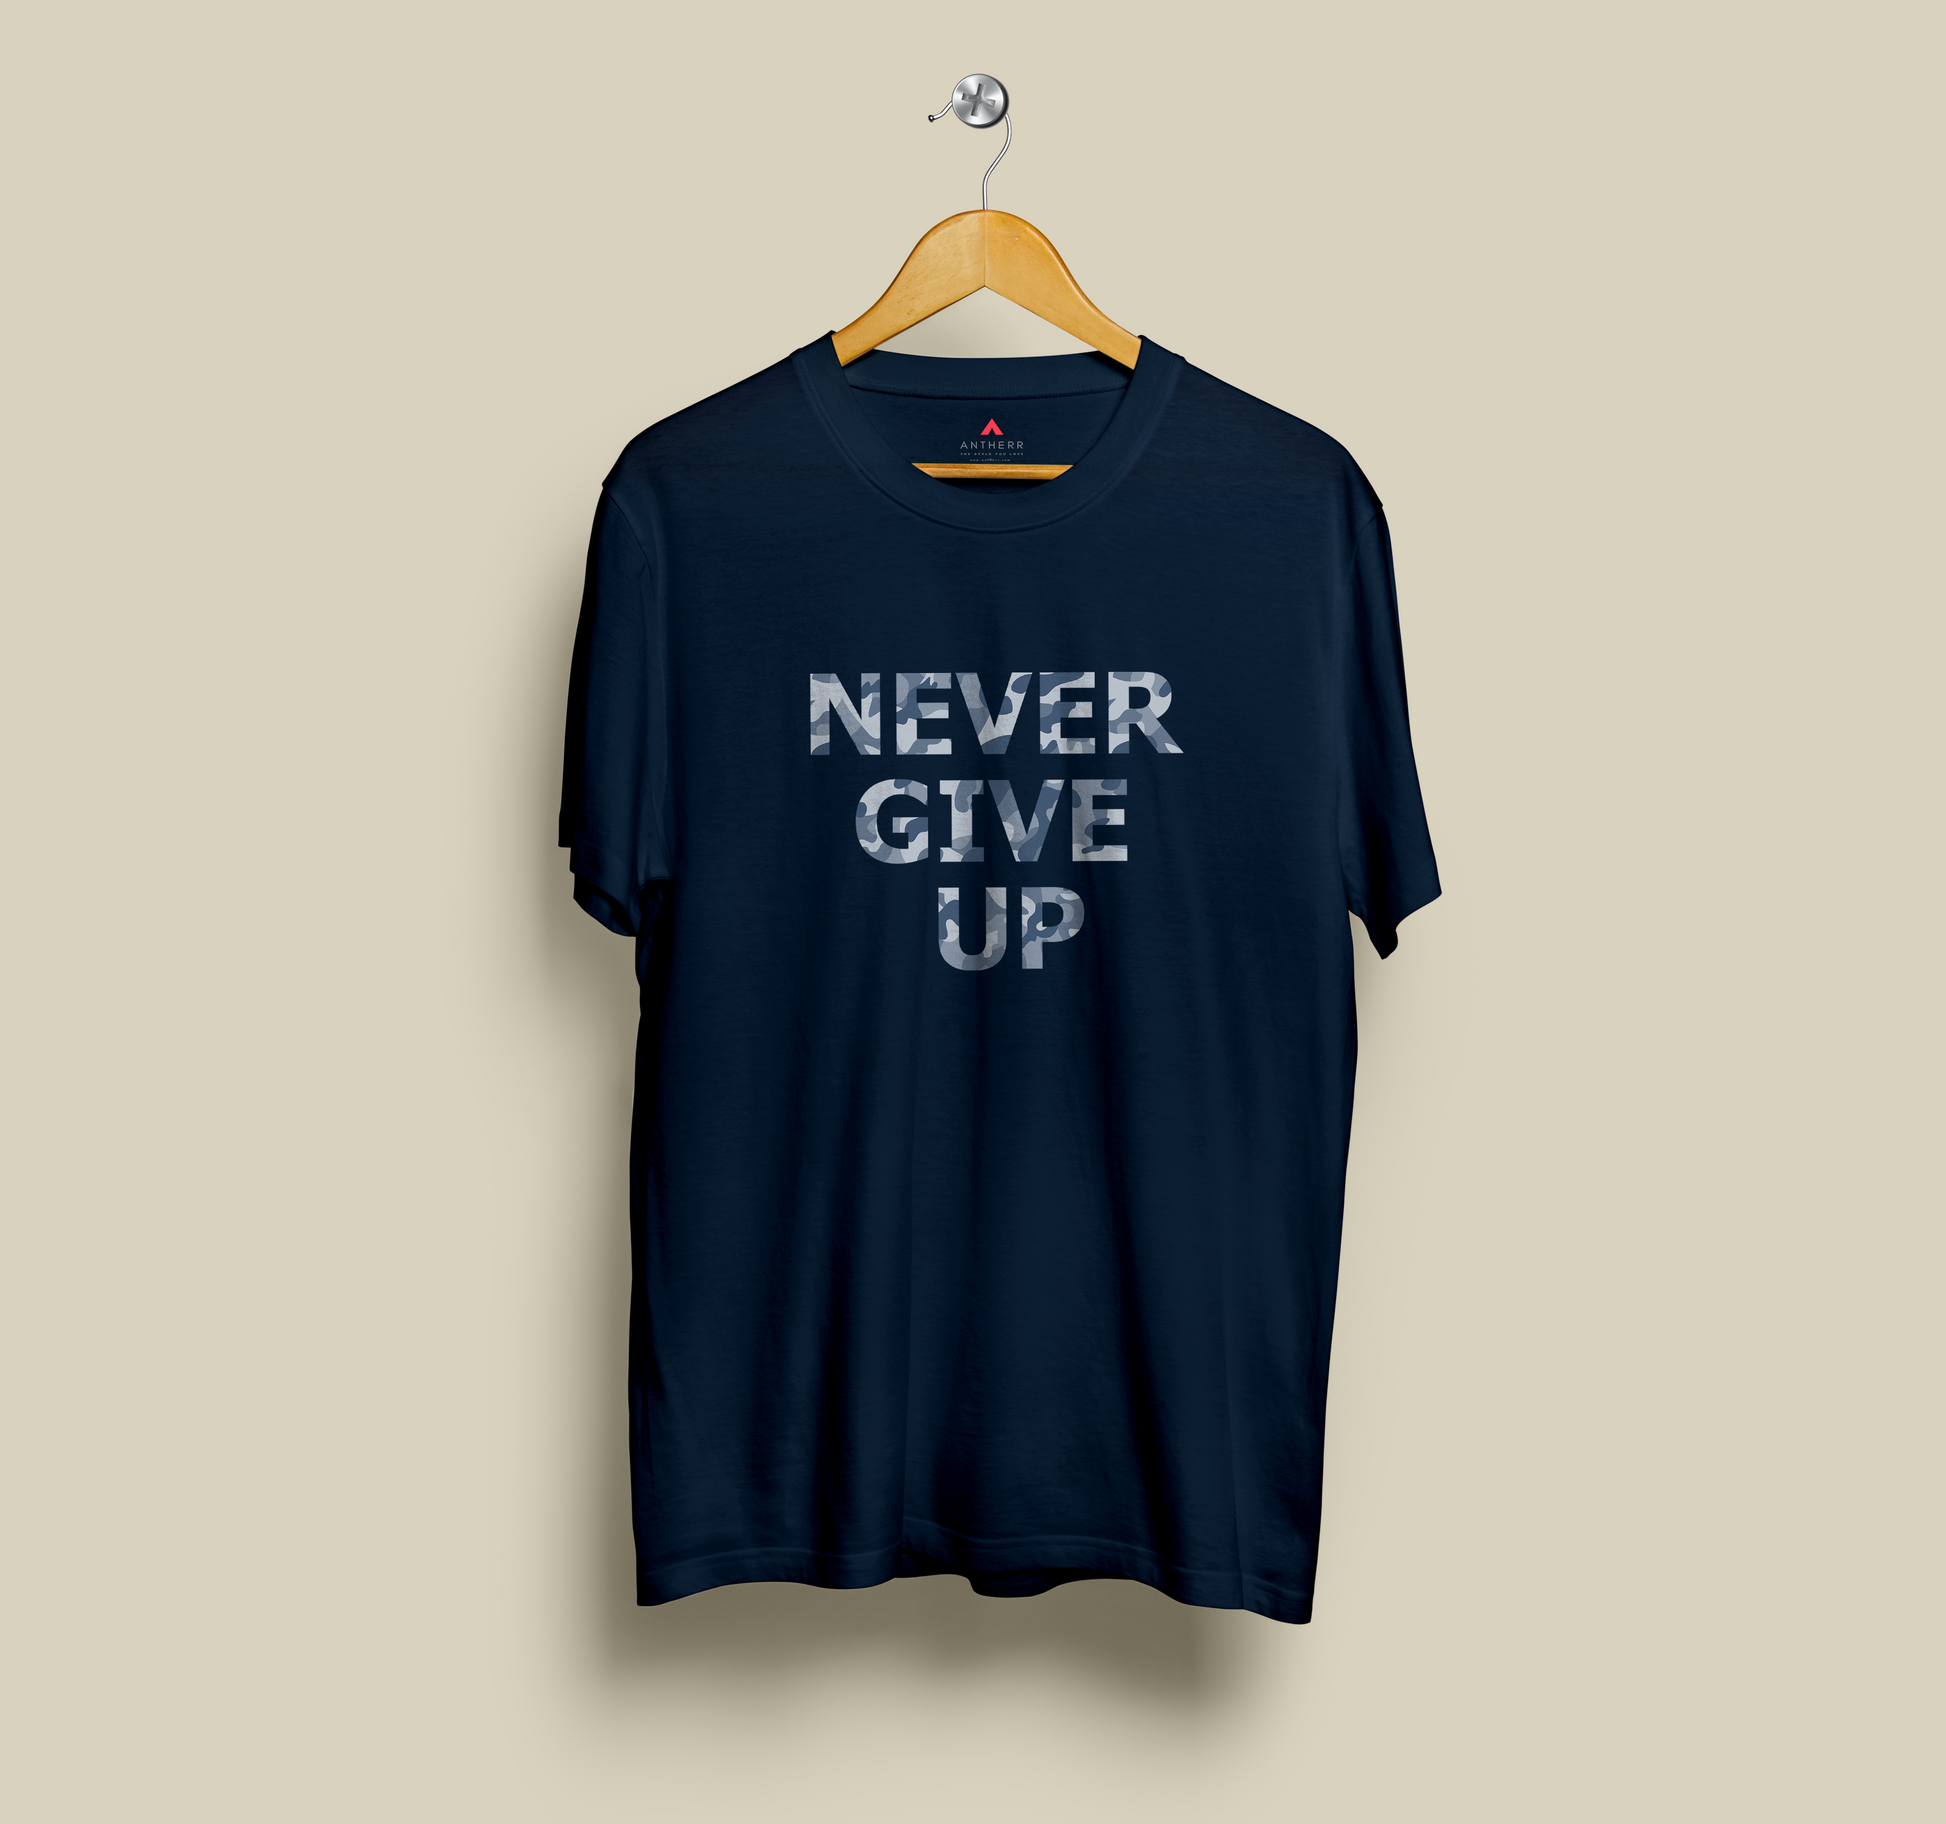 "NEVER GIVE UP" - HALF SLEEVE T-SHIRTS